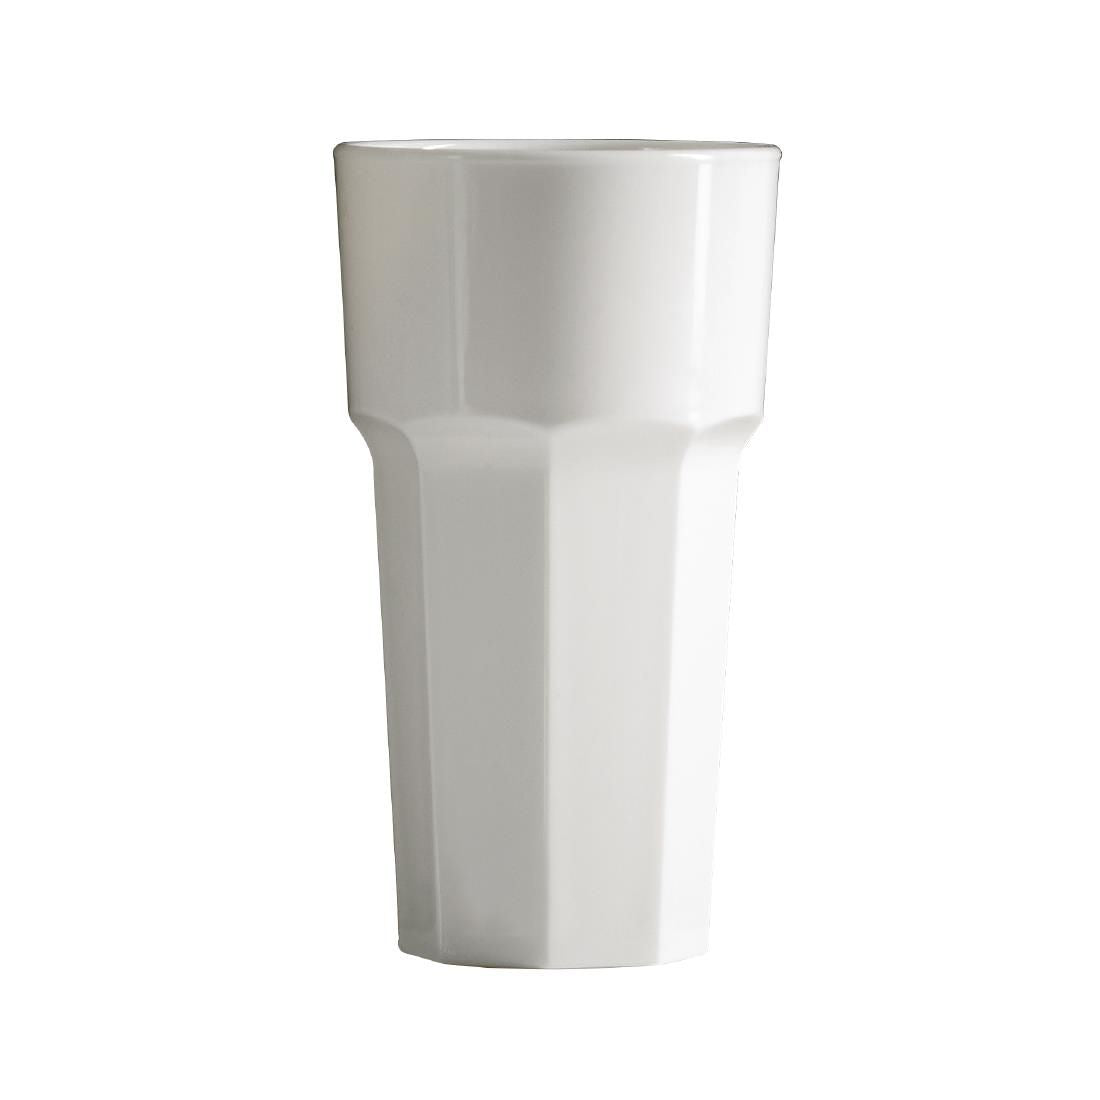 DC410 BBP Polycarbonate Tumbler 340ml White (Pack of 36) JD Catering Equipment Solutions Ltd